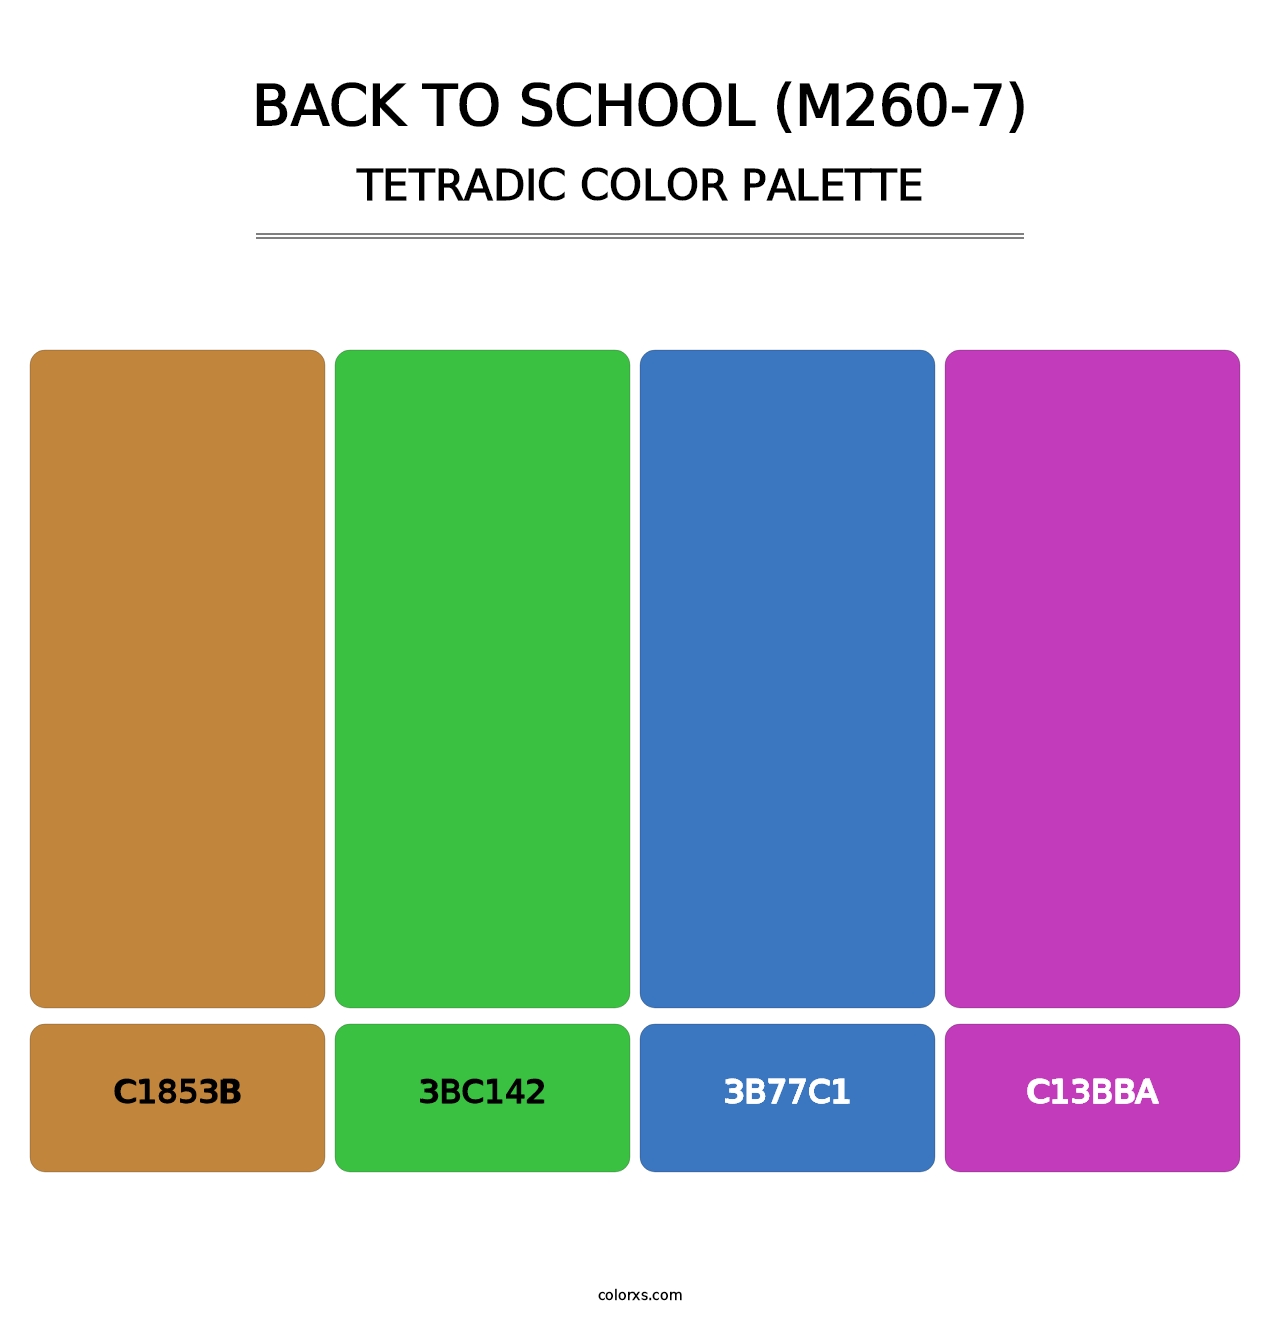 Back To School (M260-7) - Tetradic Color Palette